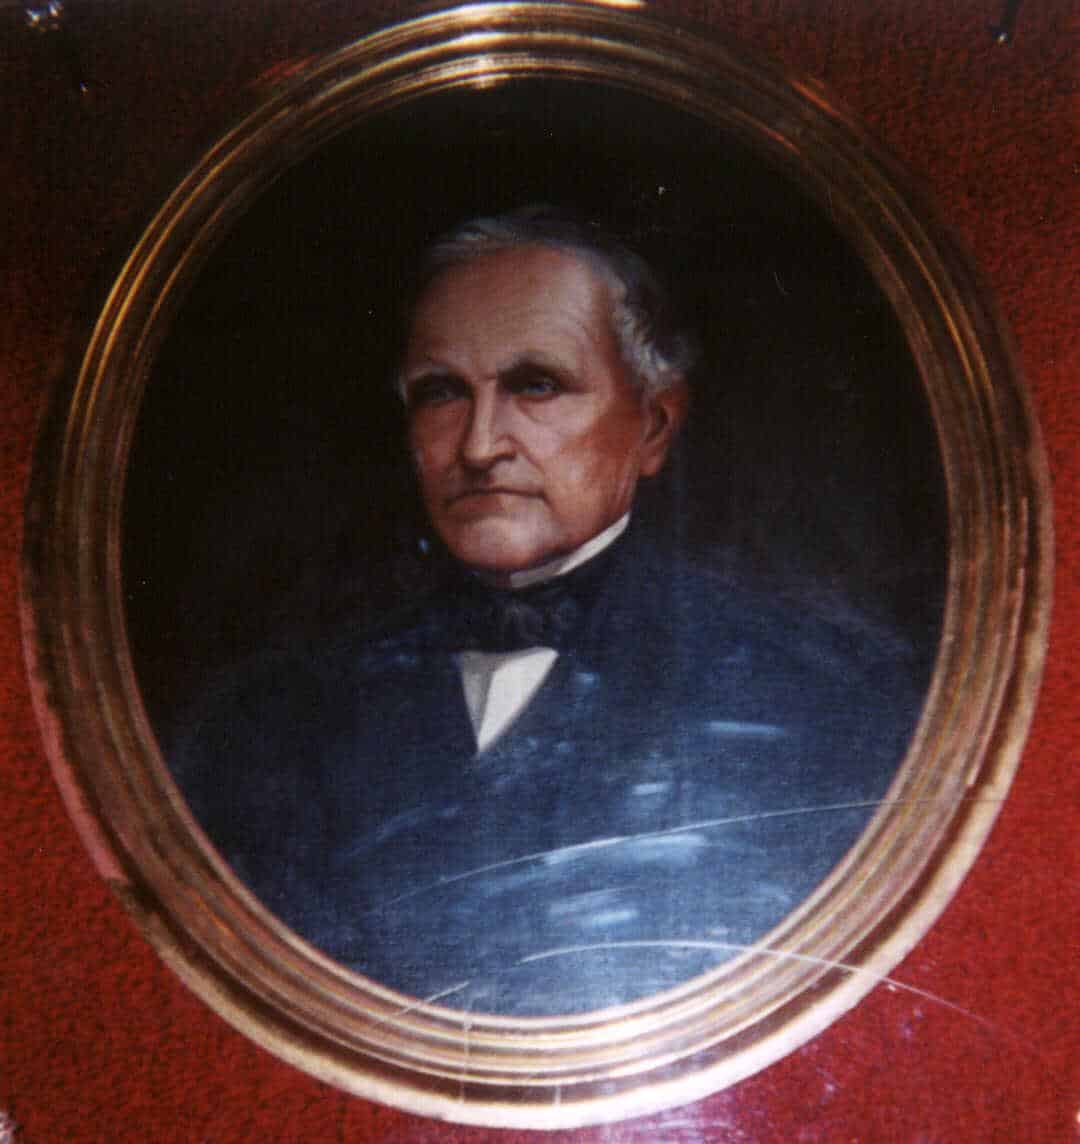 Major Isaac Compton Elston, portrait by Lew Wallace, oil on canvas